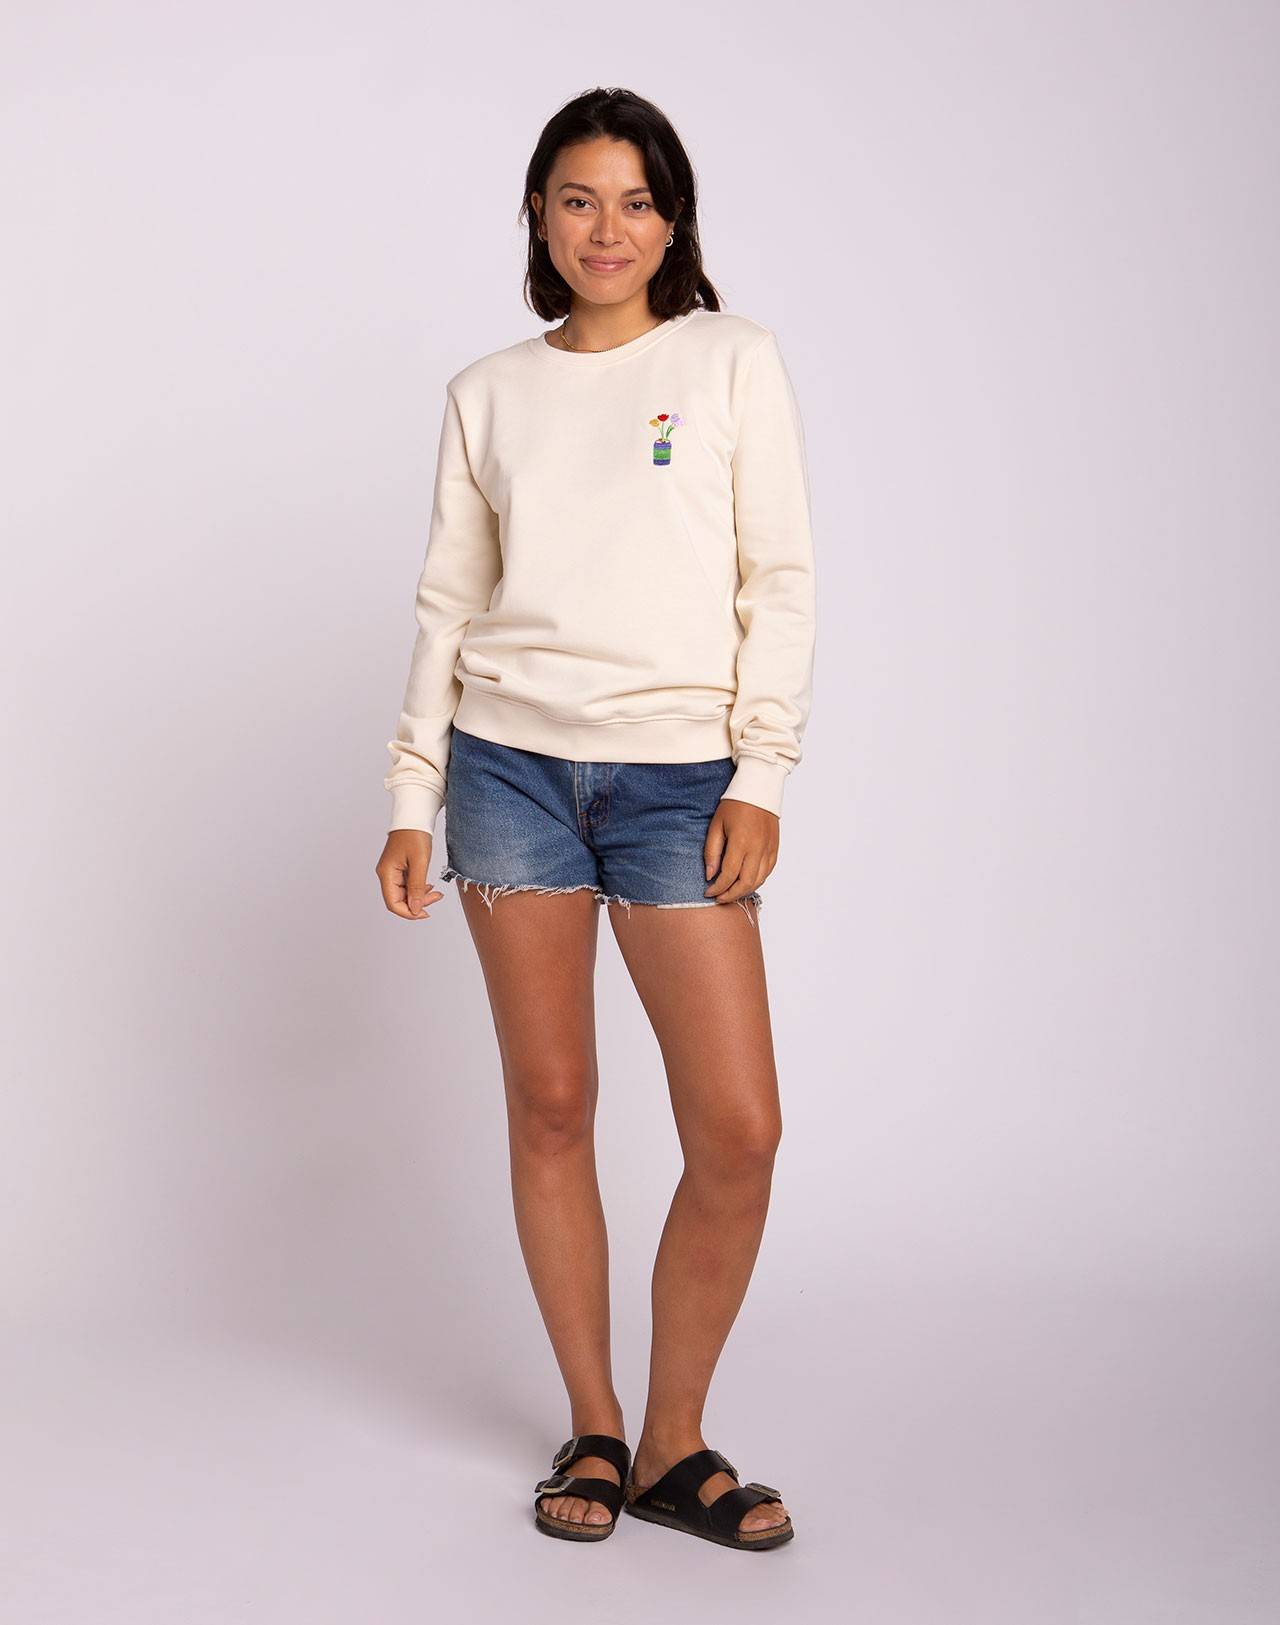 Canette Sweater